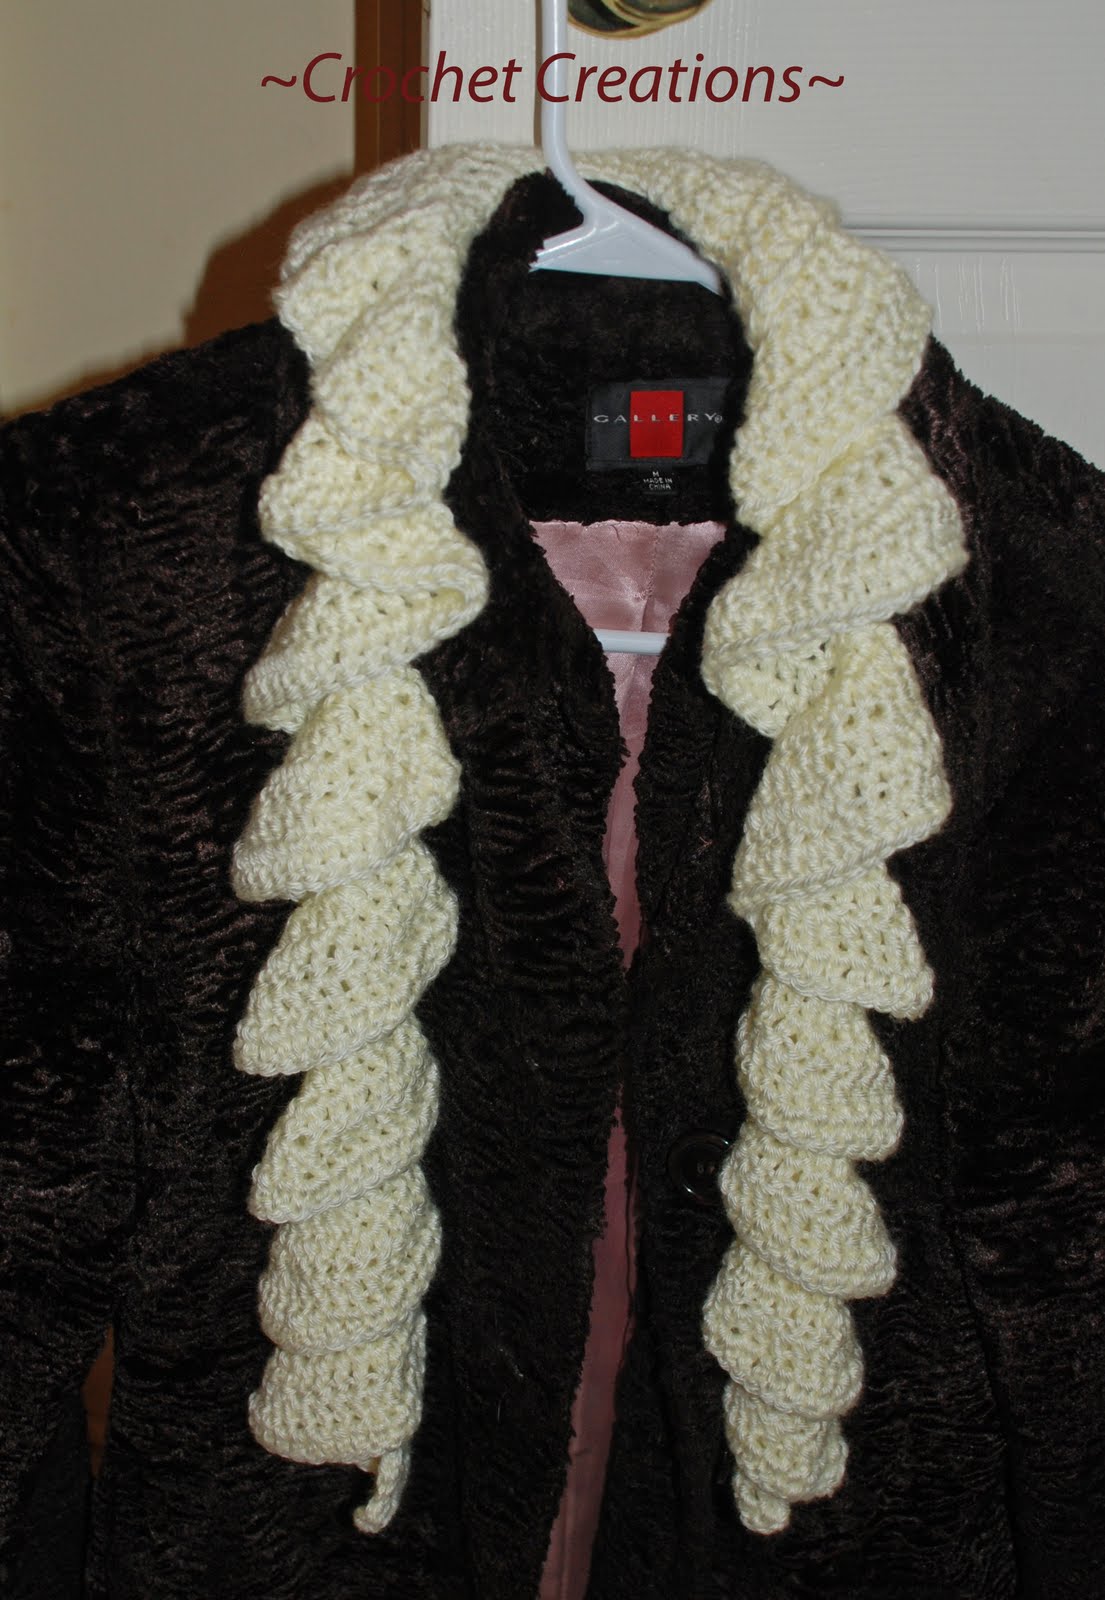 Churchmouse Classics Patterns - Two-Way Ruffled Scarf Pattern at